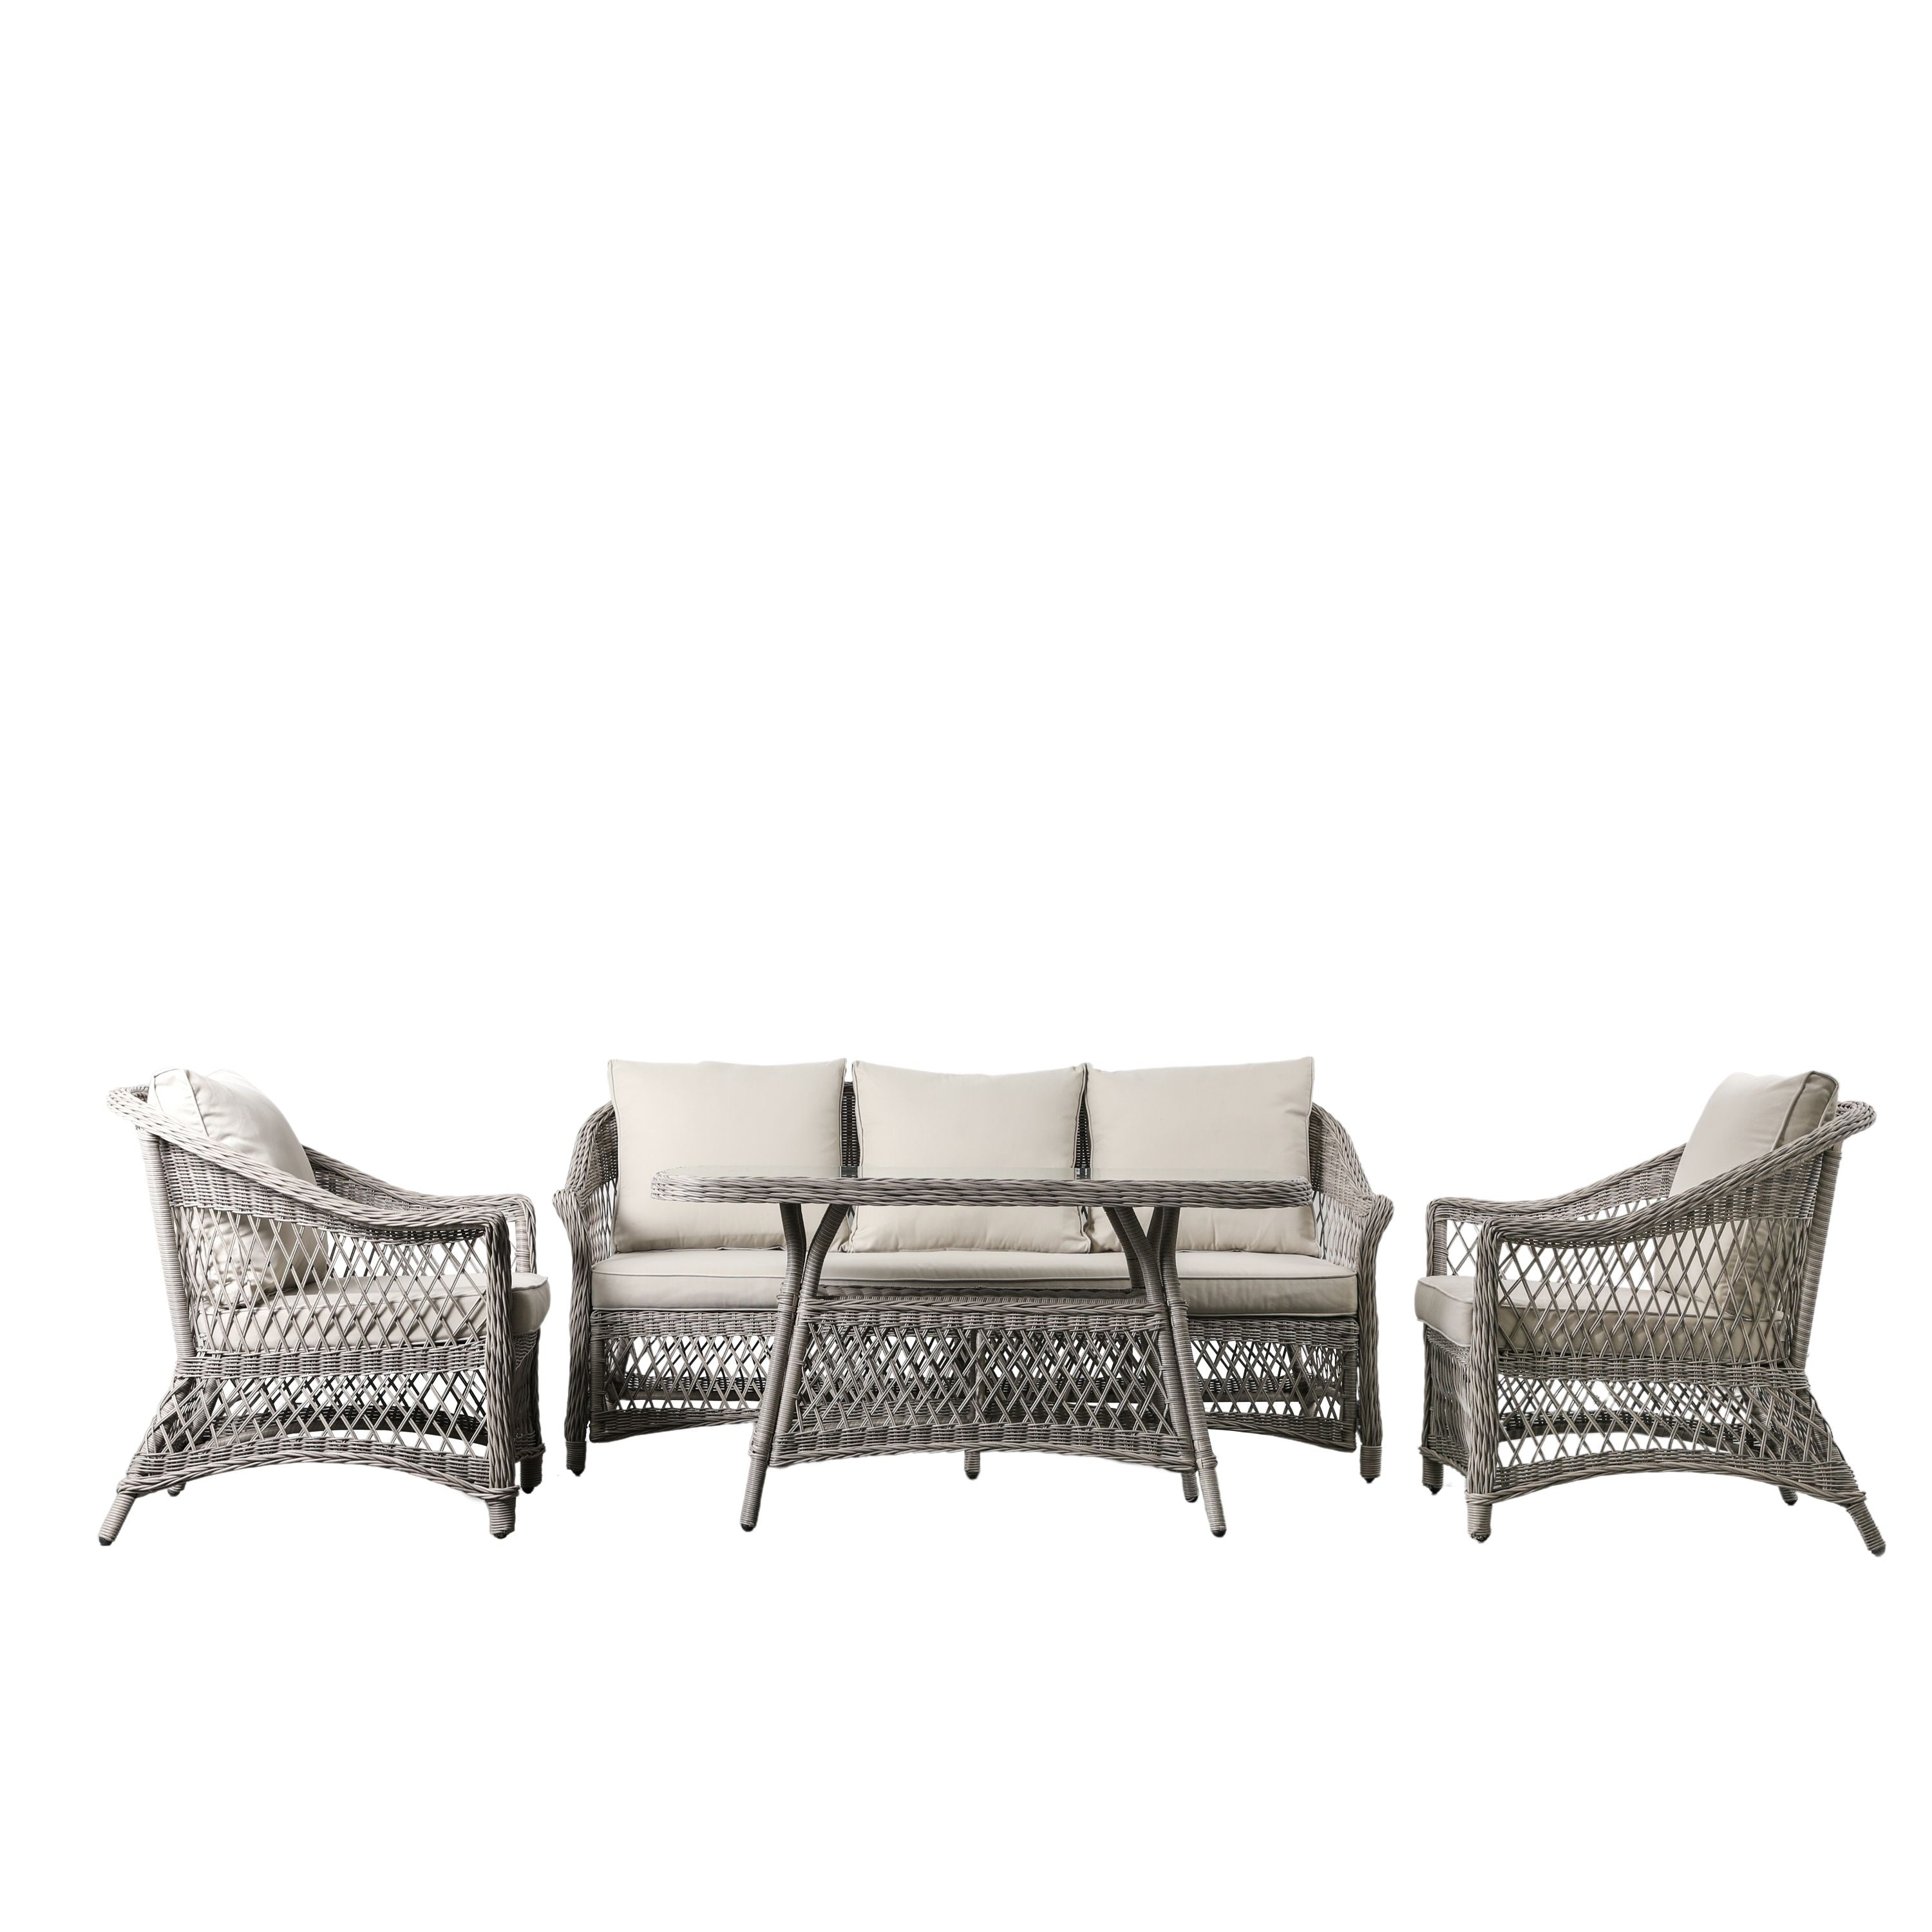 Millie Country Sofa Dining/Tea Set Stone - Vookoo Lifestyle